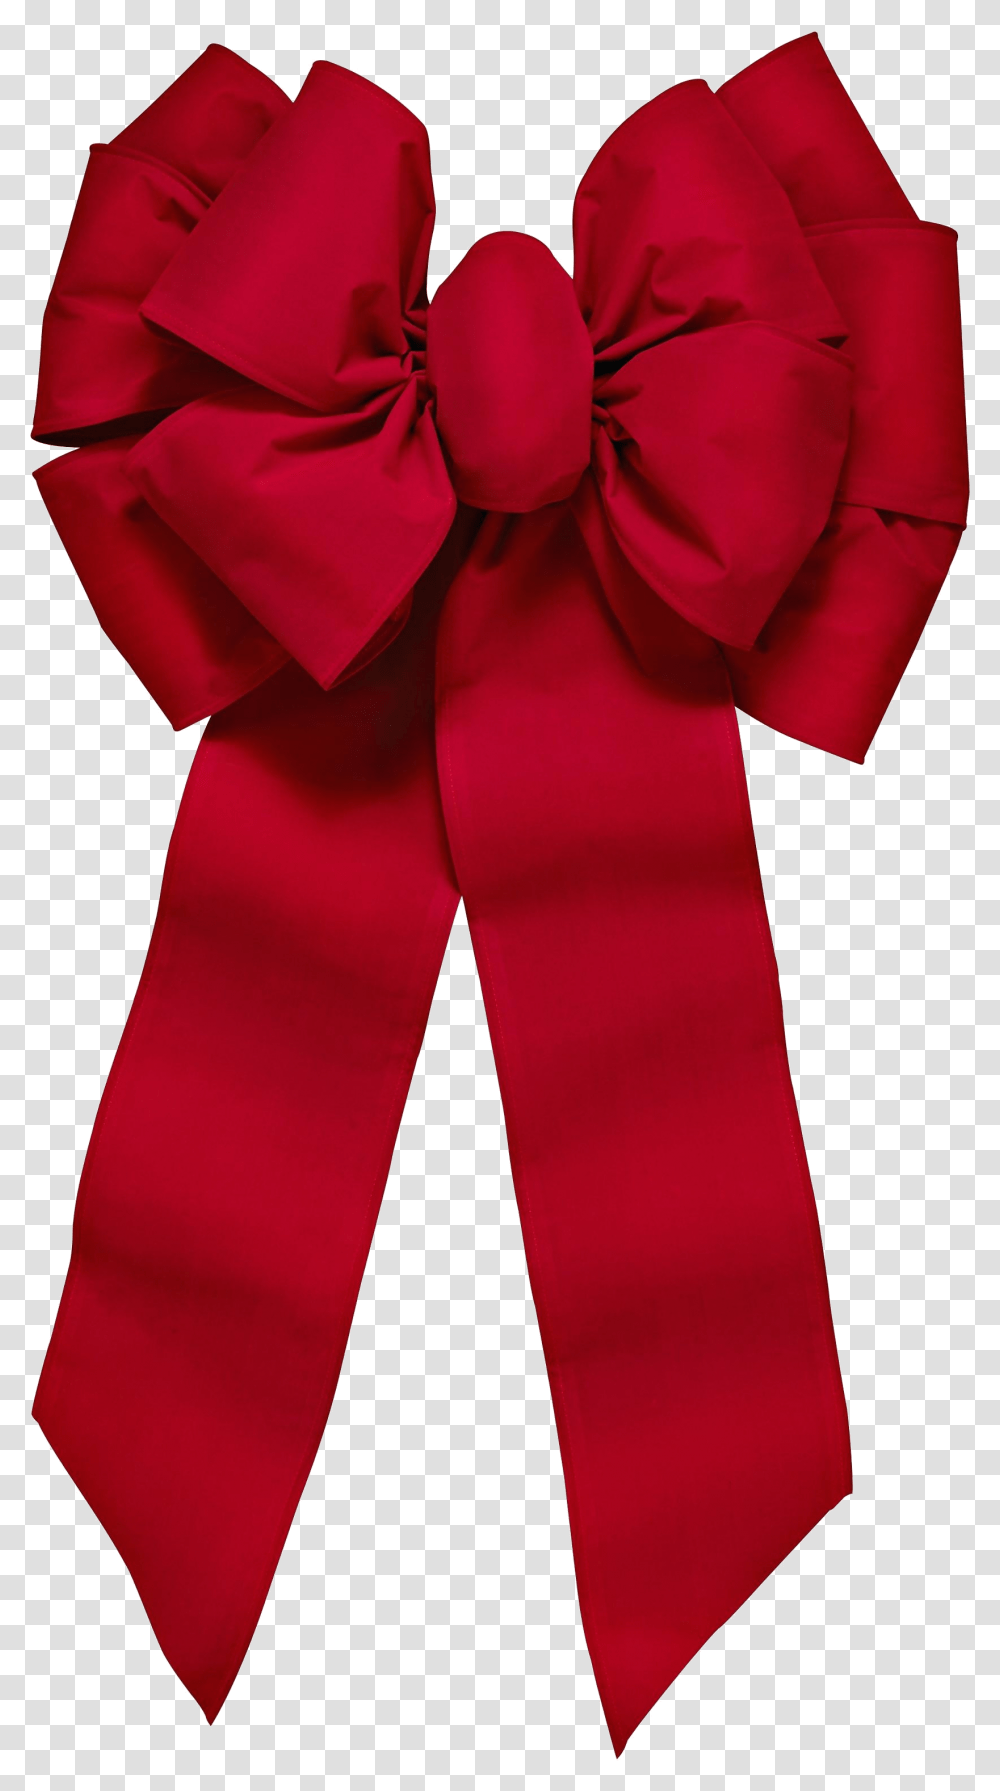 Christmas Bow How To Make Bows For Presents With Ribbon Outdoor Red Bow, Apparel, Tie, Accessories Transparent Png